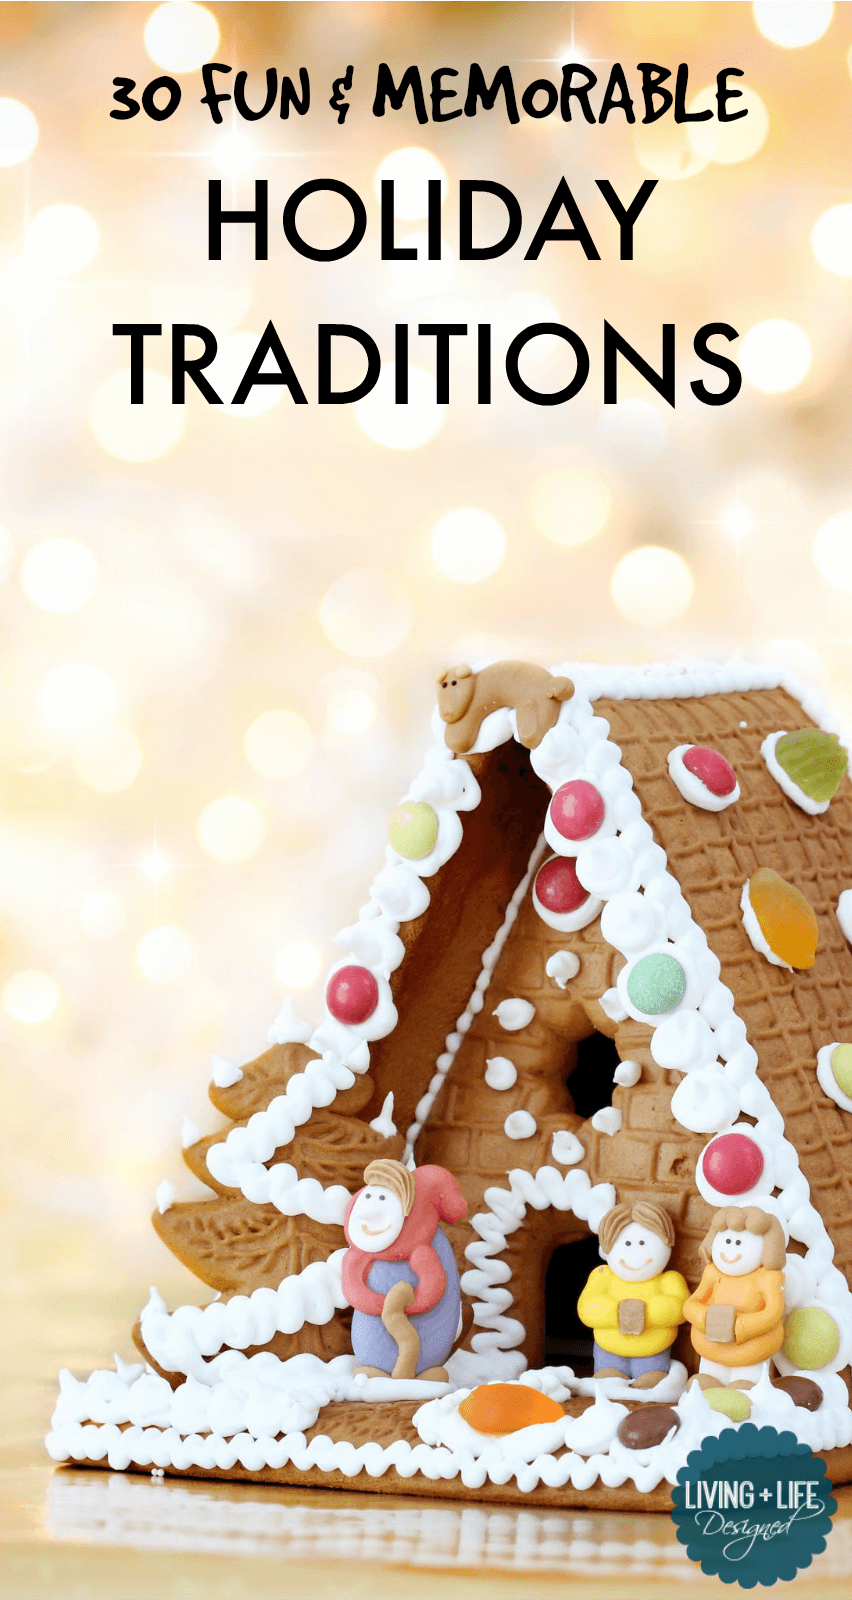 30 Fun Holiday Traditions That Will Make Christmas Magical